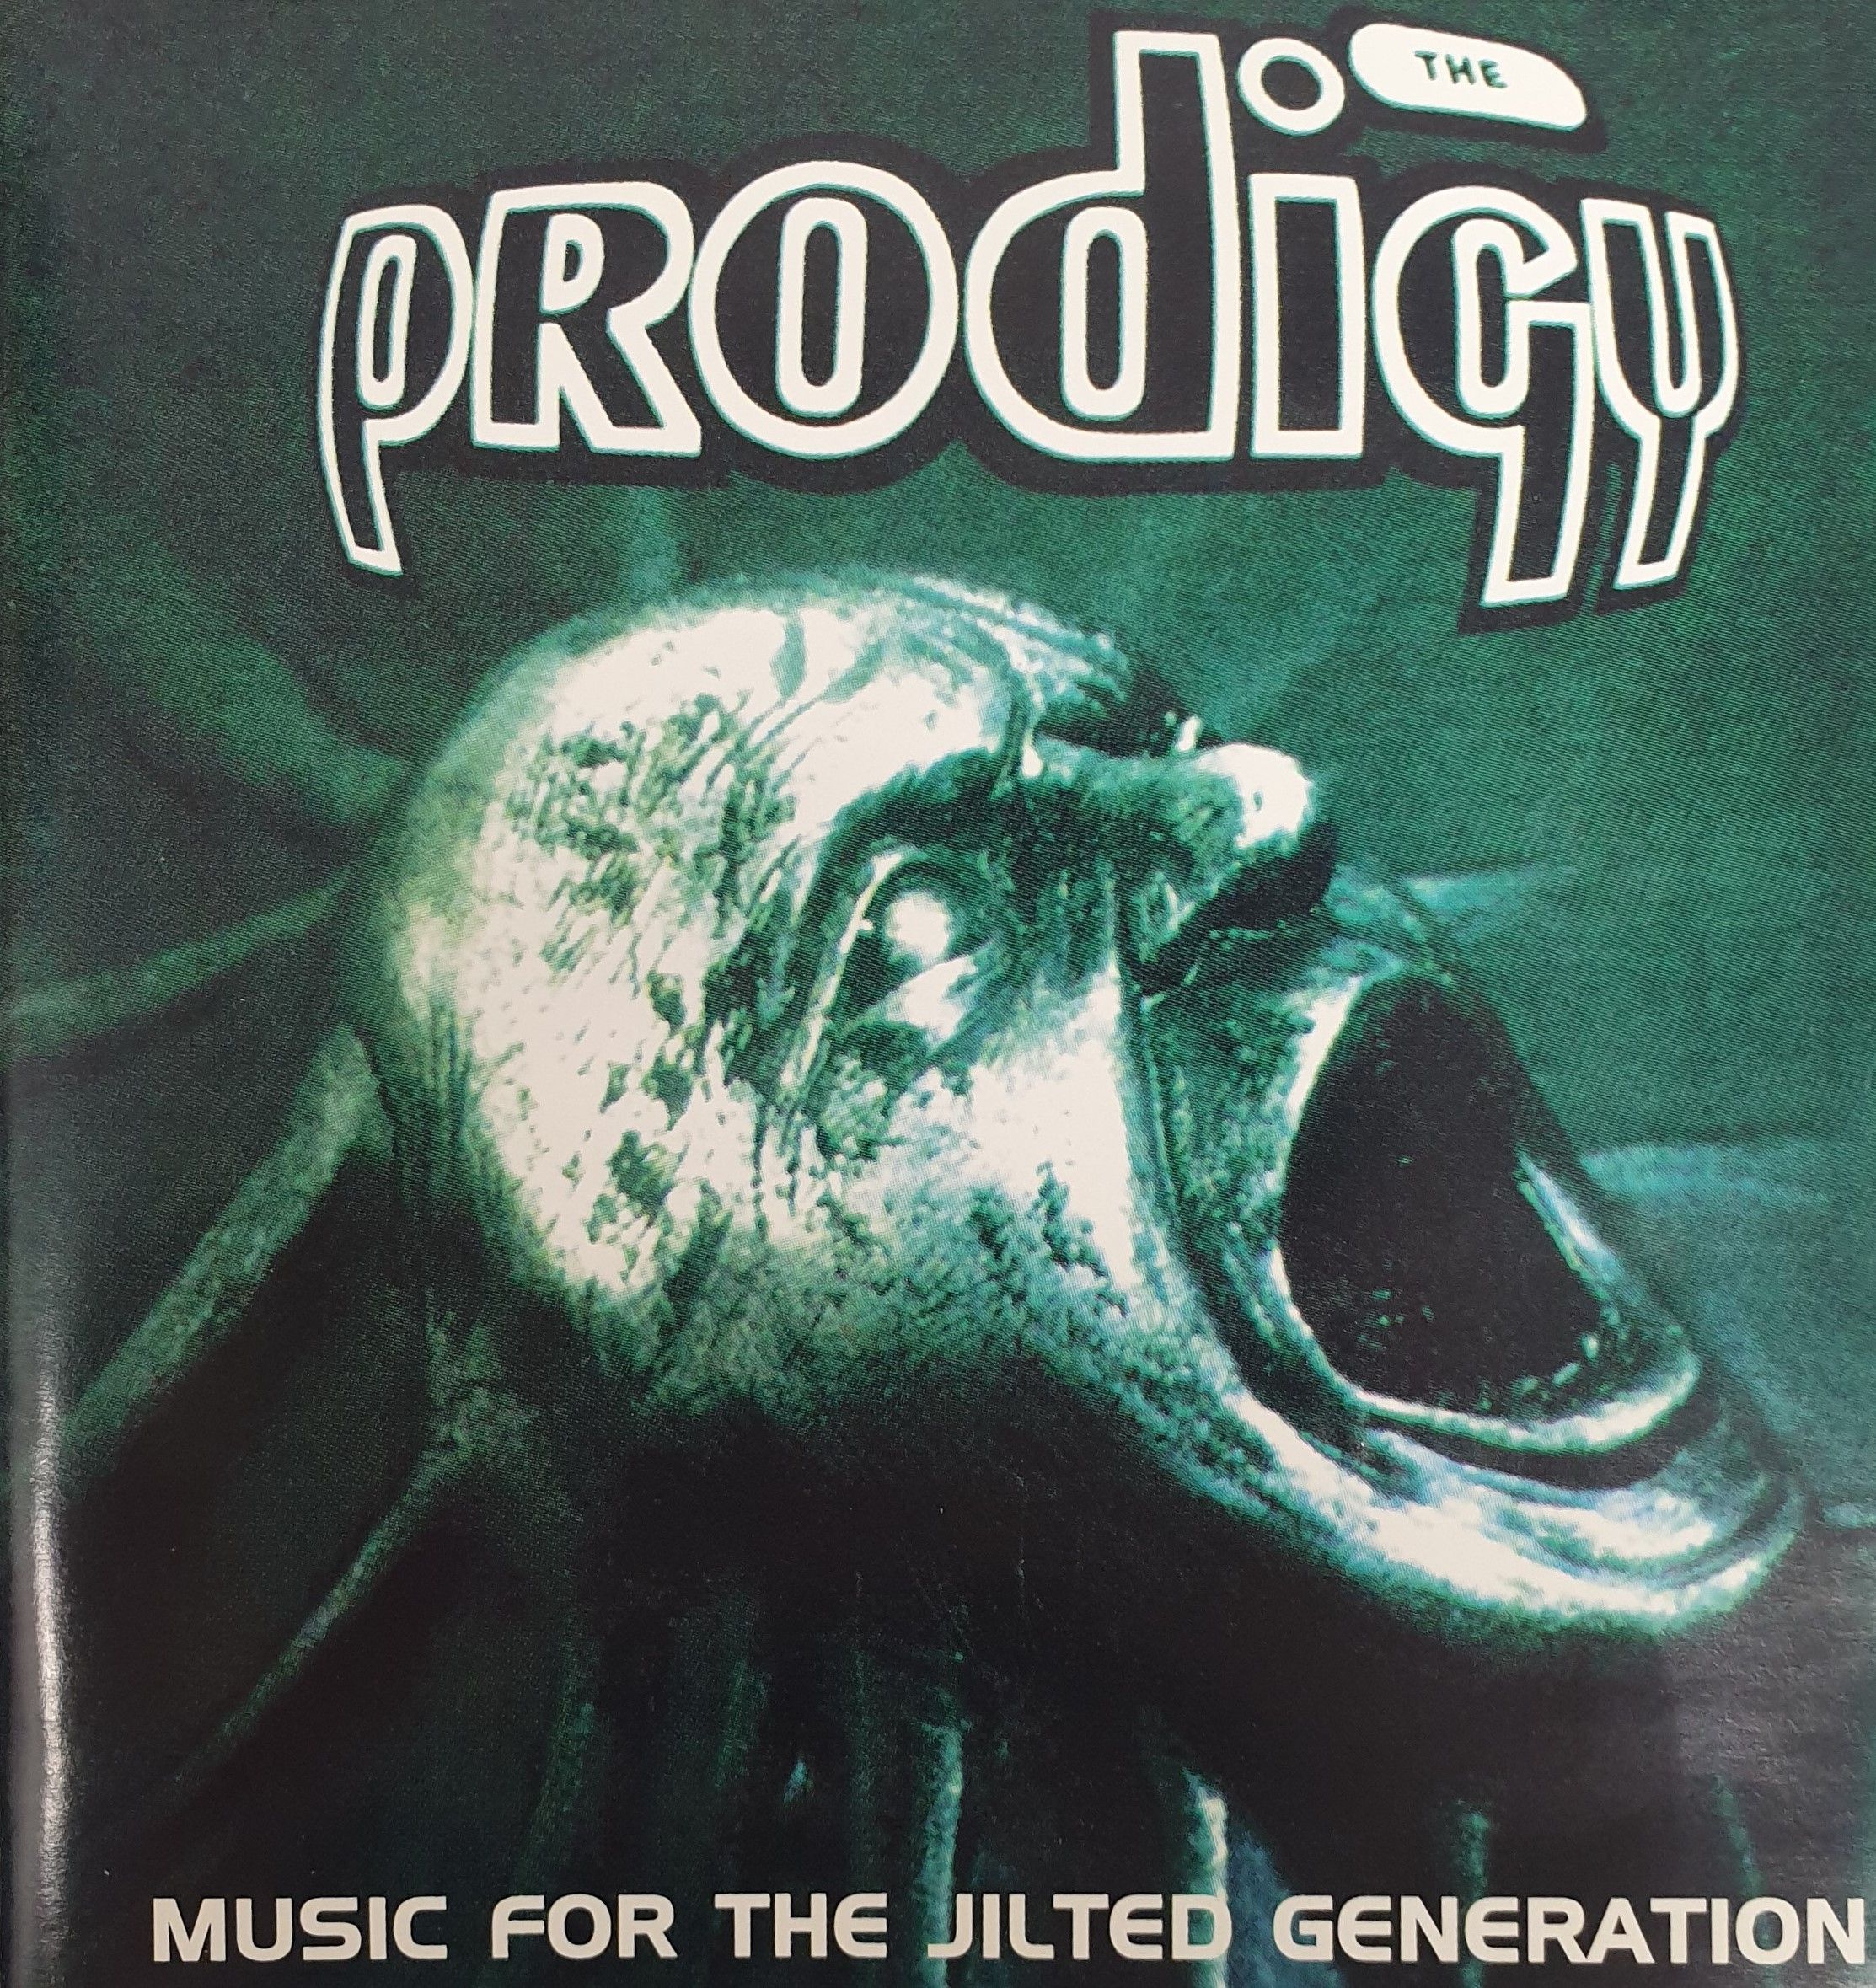 Music for the jilted generation. Music for the jilted Generation the Prodigy. The Prodigy Music for the jilted Generation Vinyl. Prodigy Music for the jilted Generation 1994 [Vinyl Rip].